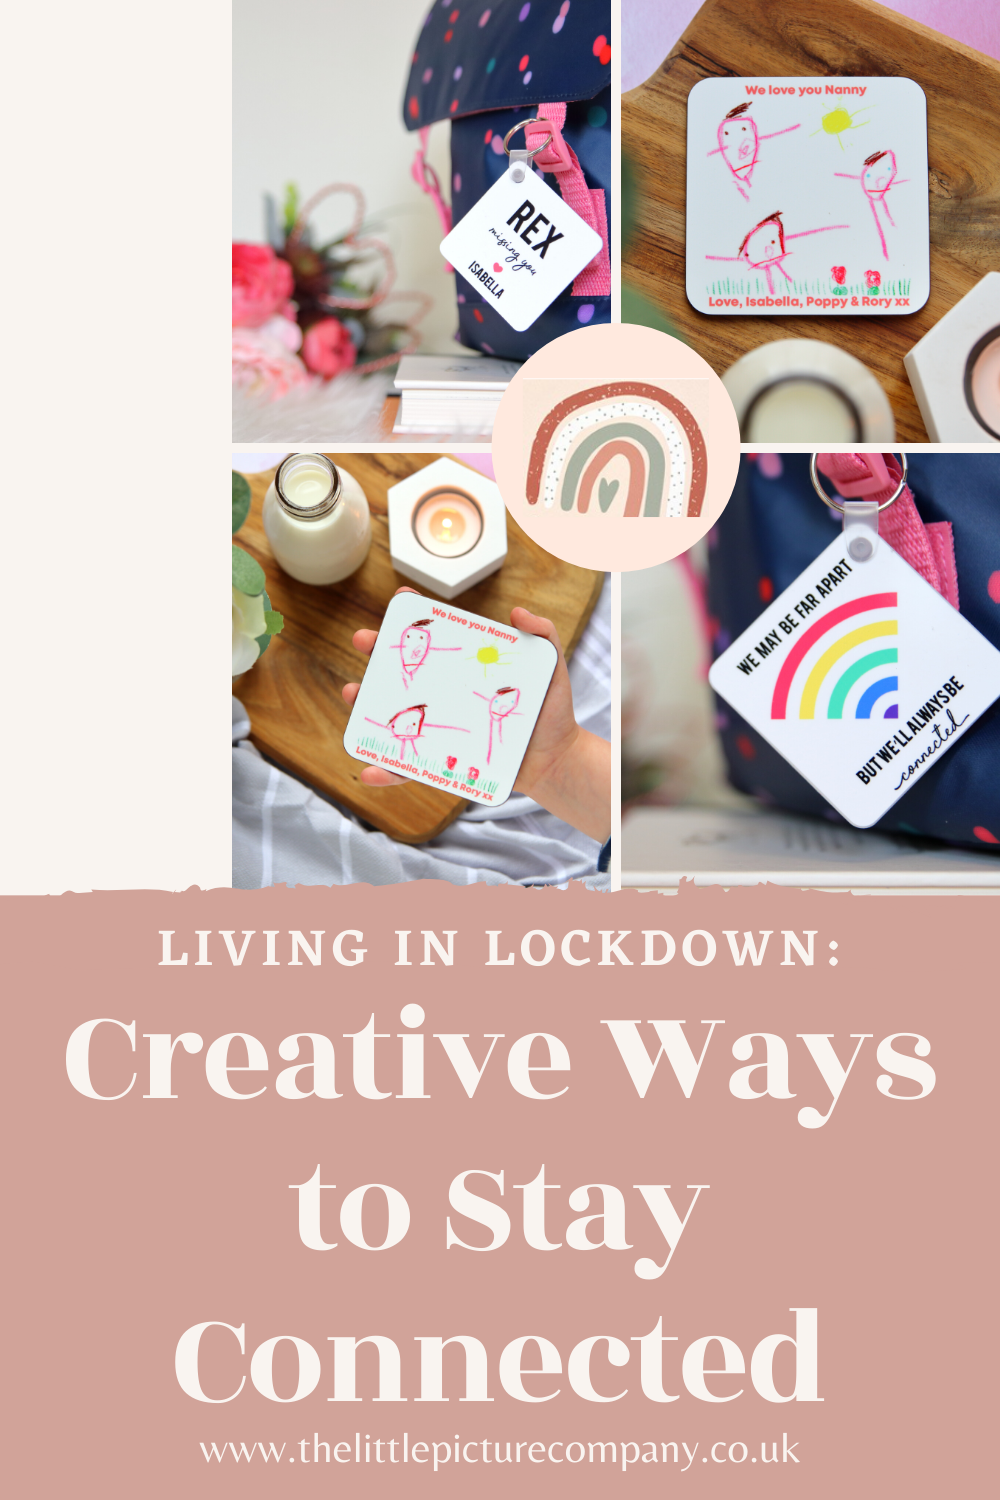 Living in Lockdown: Creative Ways to Staying Connected